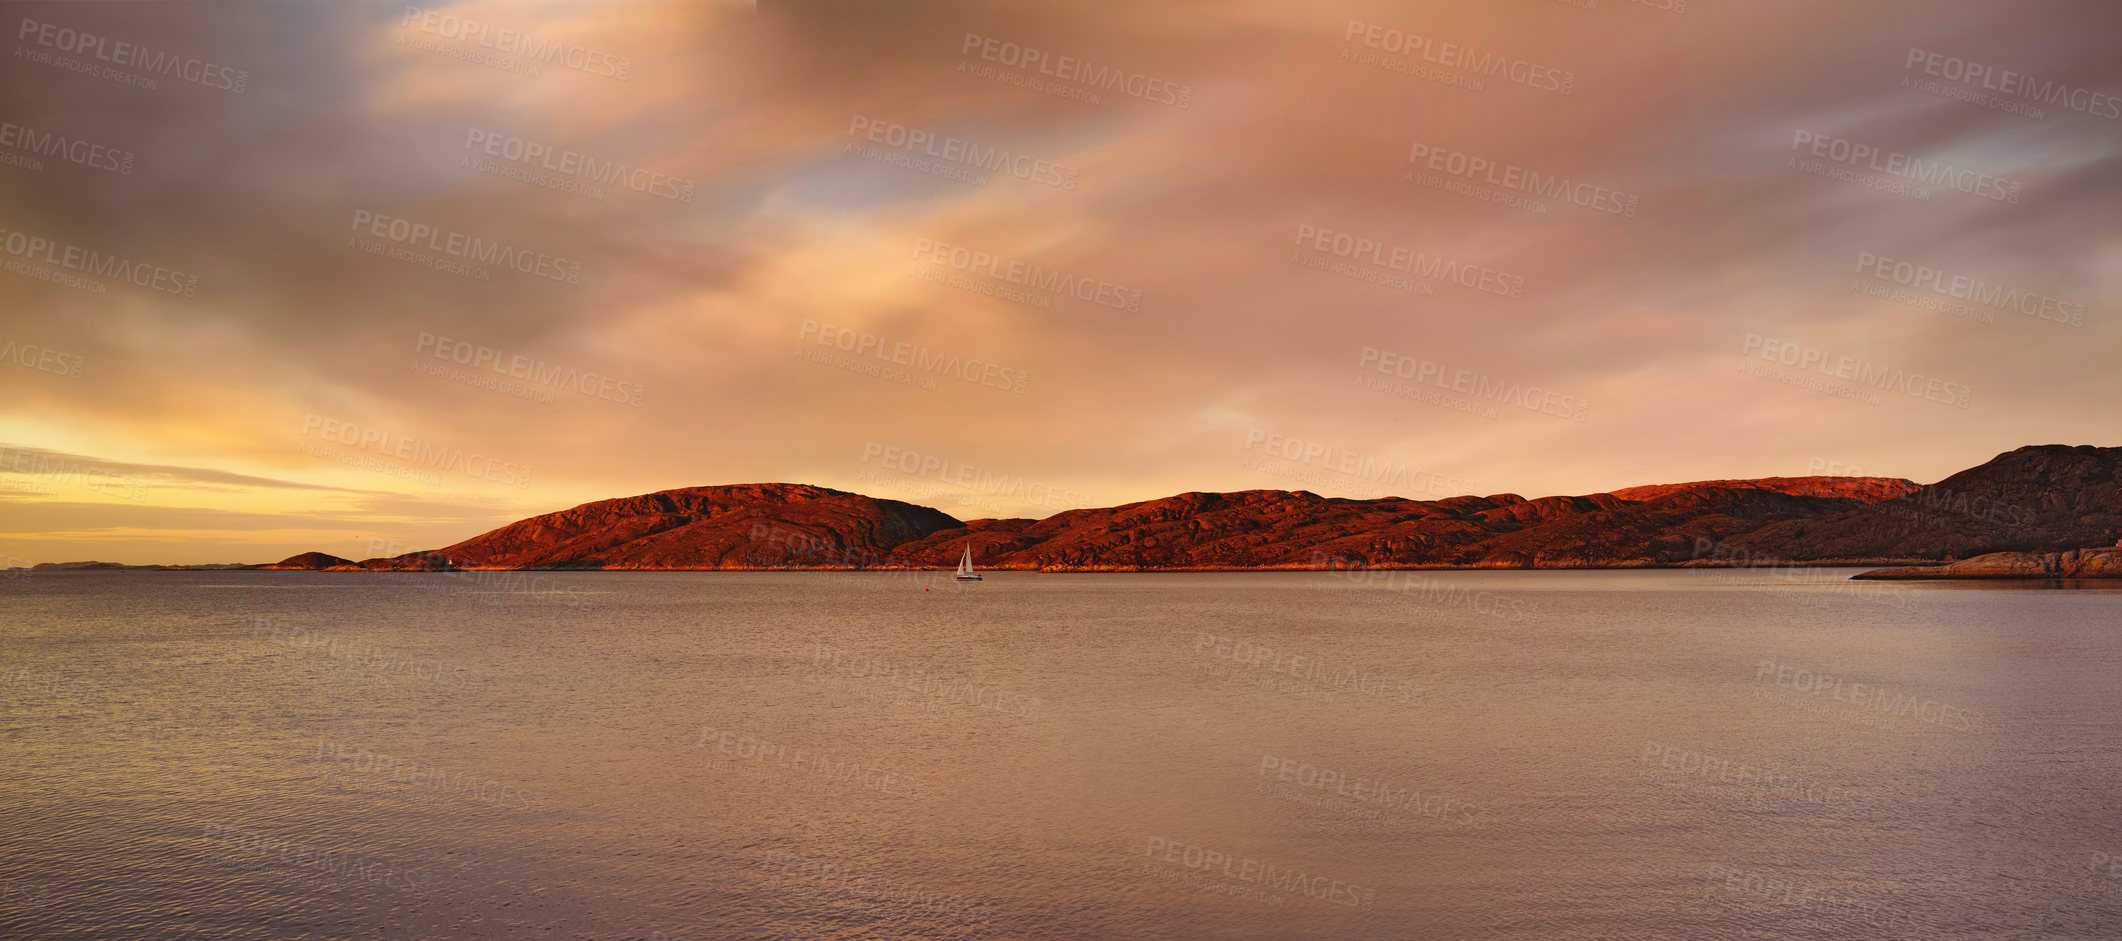 Buy stock photo Distant sea landscape near a mountain with a small sailboat in the water. The ocean, beach, or large lake with a boat in the distance near a hill outdoors during sunset on a cloudy day